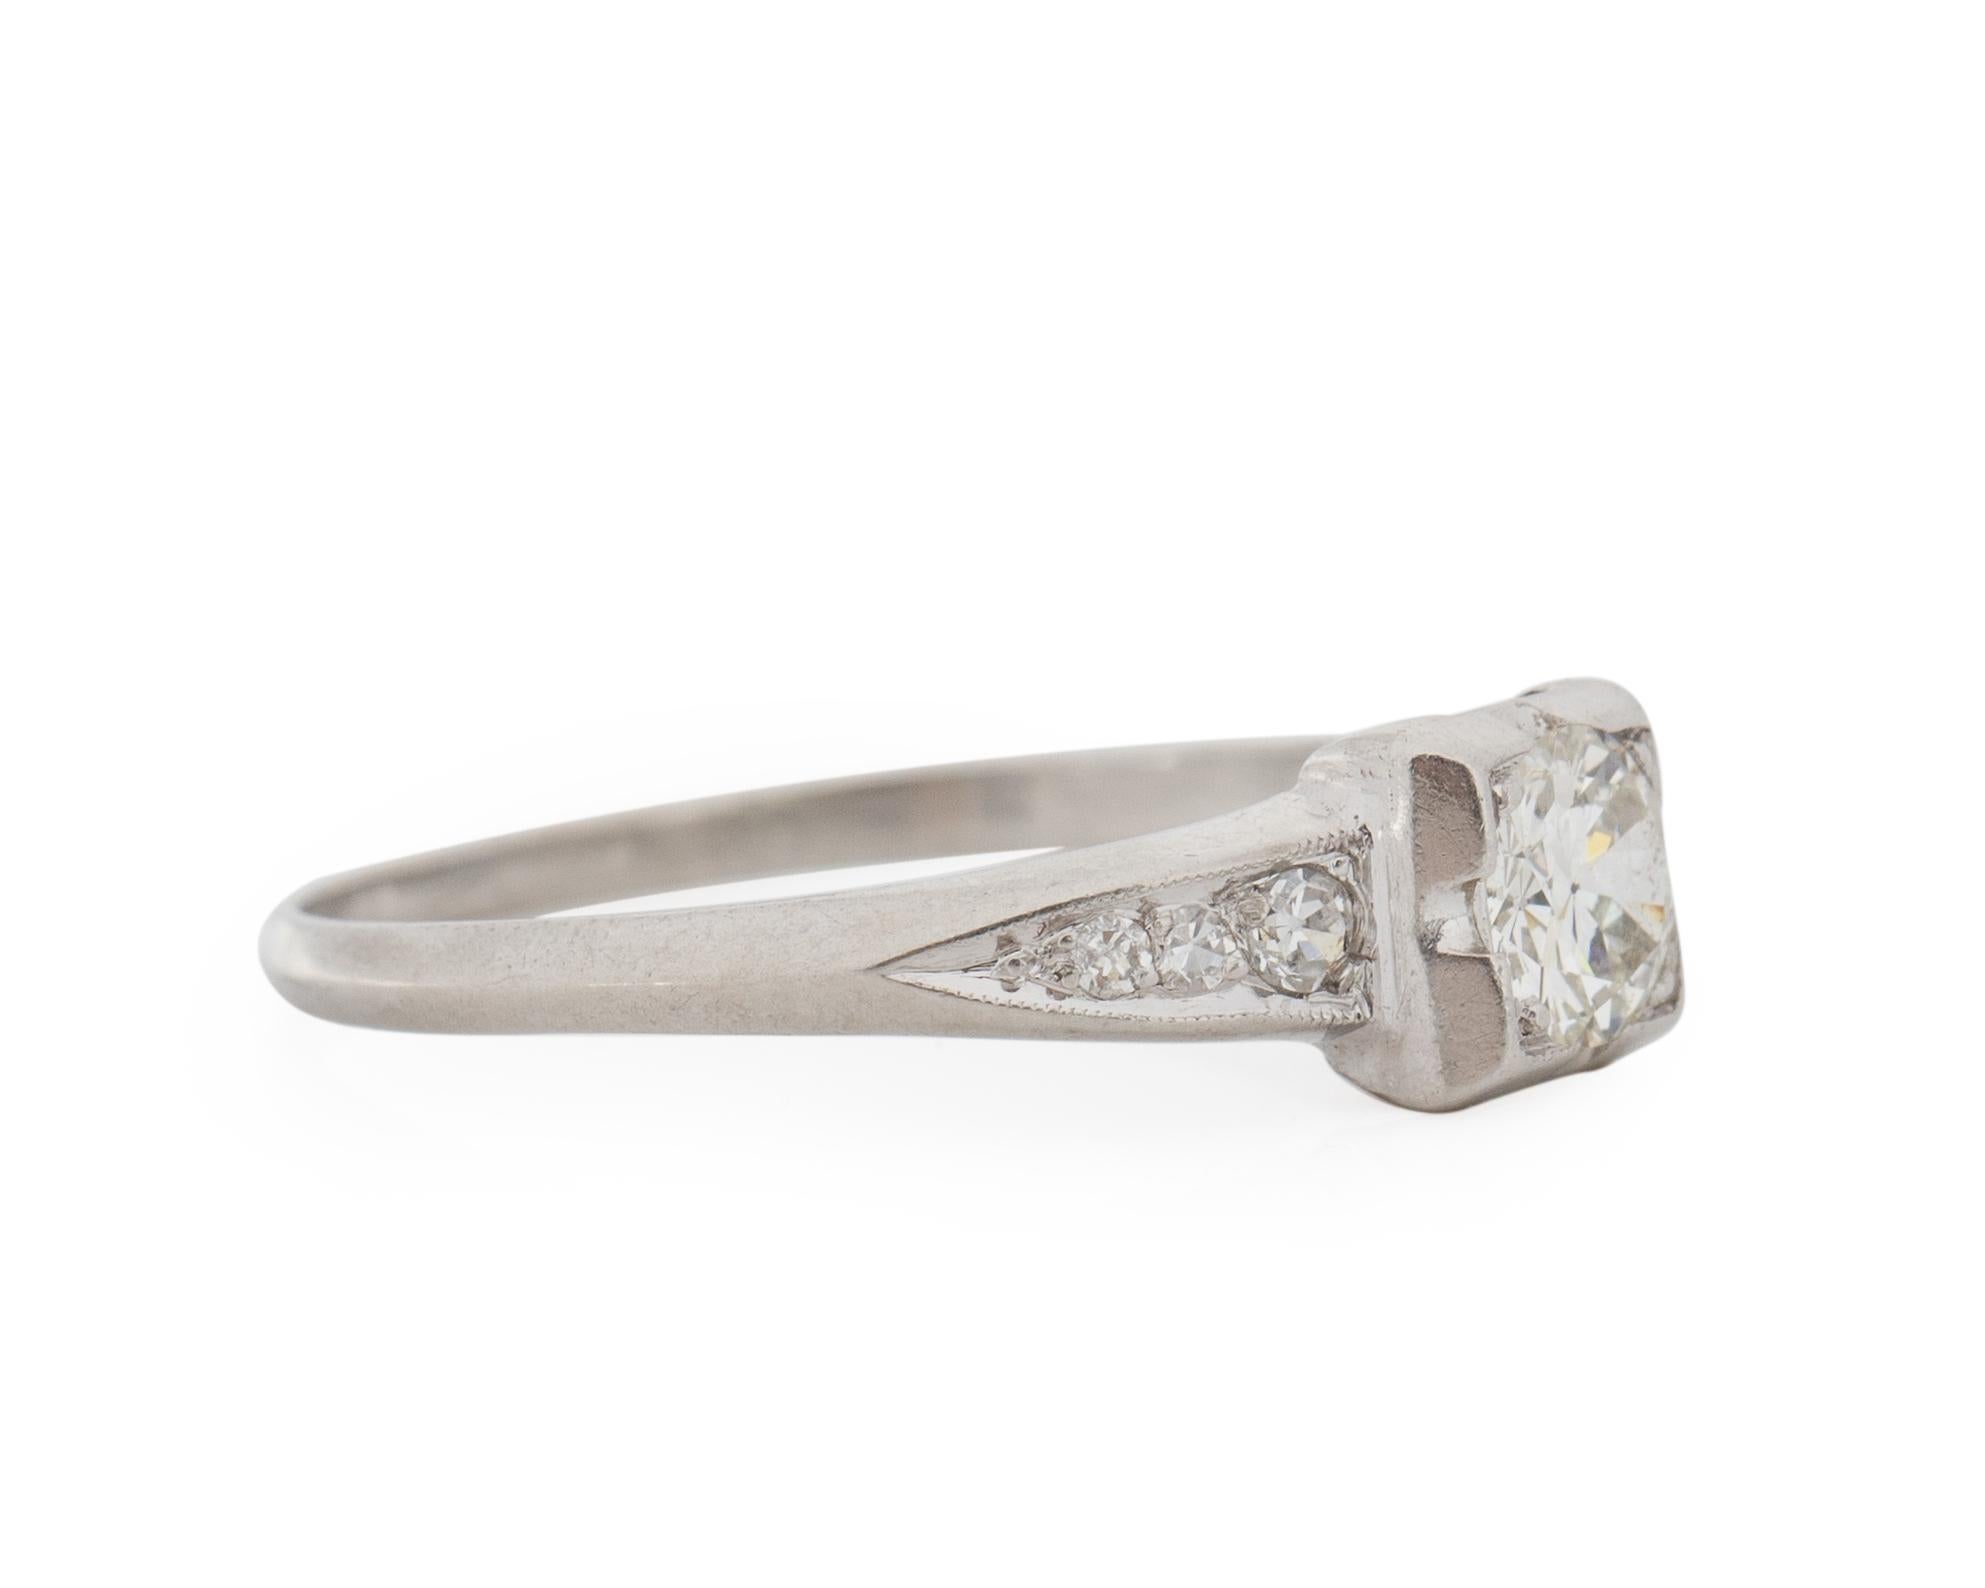 Item Details: 
Ring Size: 7
Metal Type: Platinum [Hallmarked, and Tested]
Weight: 2.1 grams

Center Diamond Details:
Weight: .40 Carat
Cut: Old European Brilliant
Color: J
Clarity: VS1

Side Diamond Details:
Weight: .12 Carat Total Weight
Cut: Old